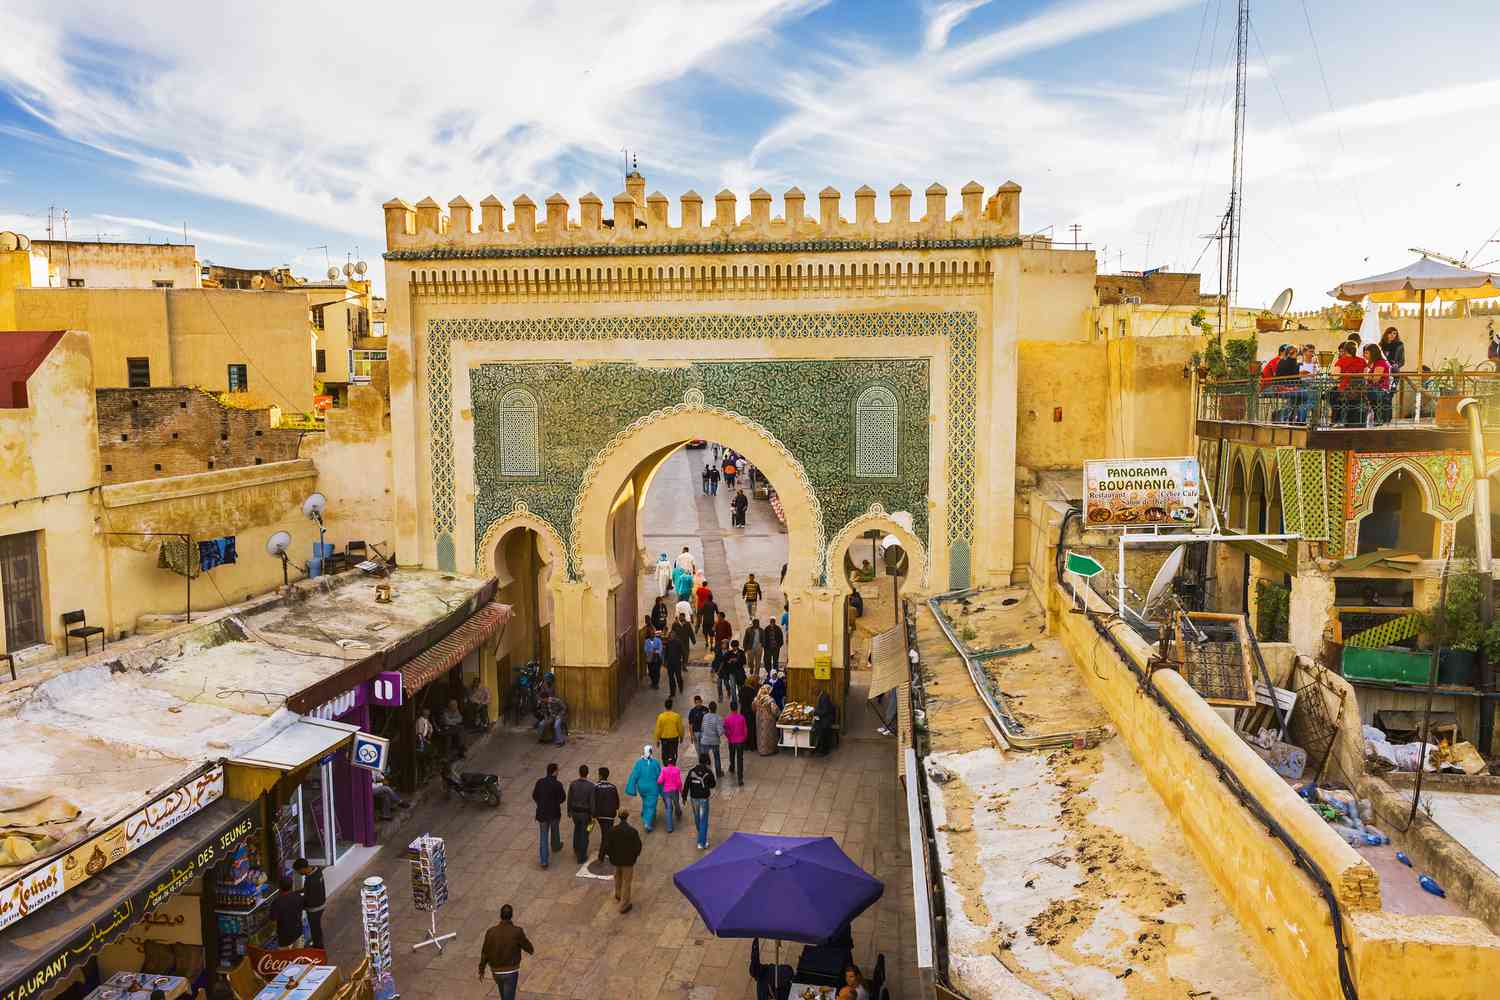 Is It Safe To Travel To Morocco?